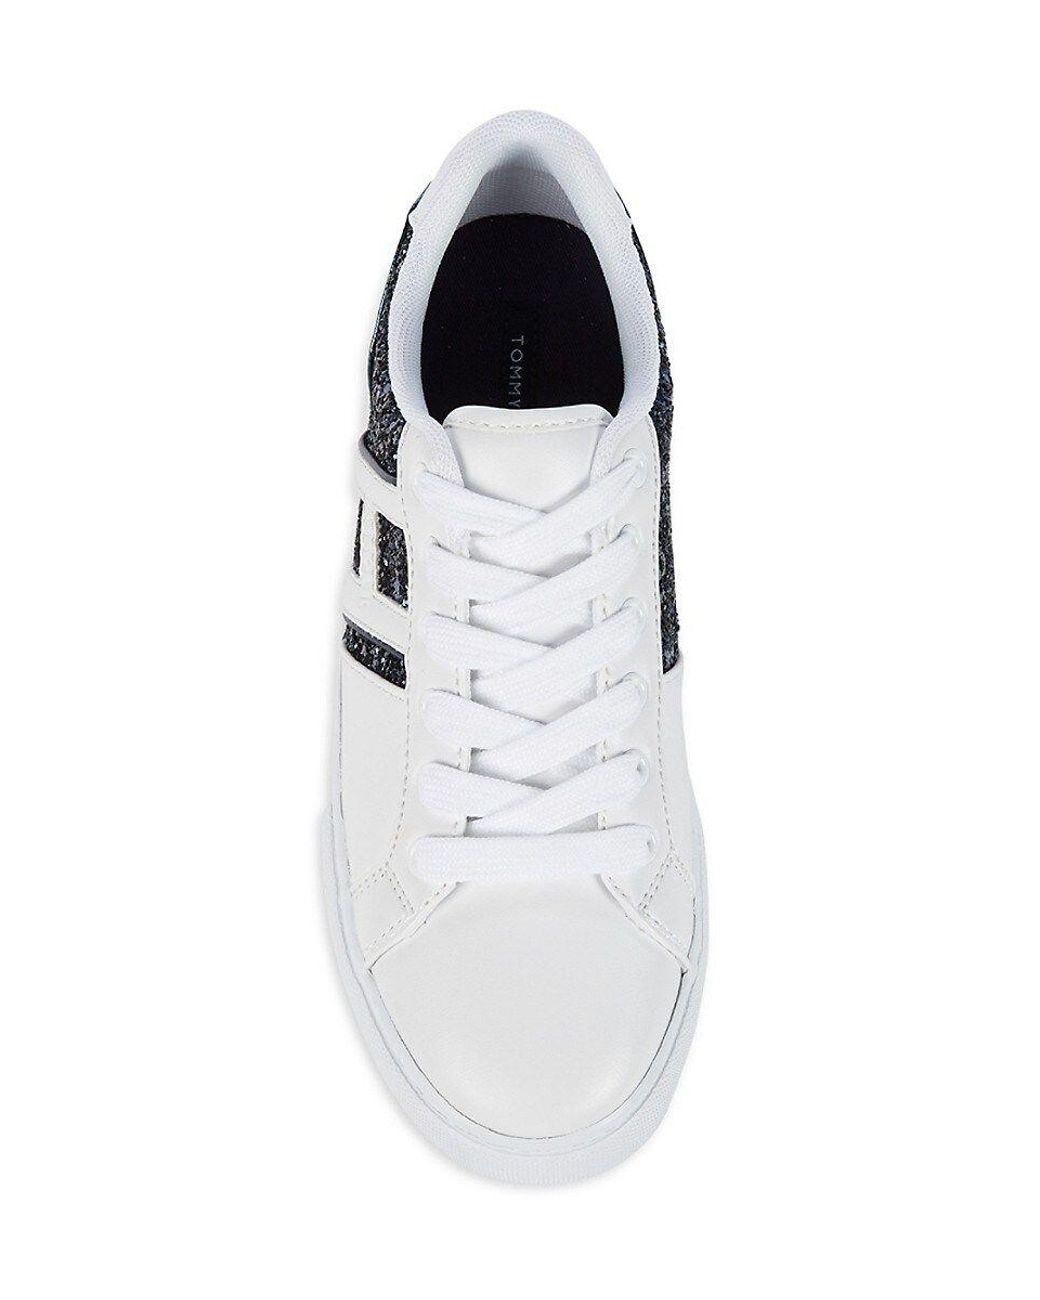 Tommy Hilfiger Lemii Metallic-embellished Low-cut Sneakers in White | Lyst